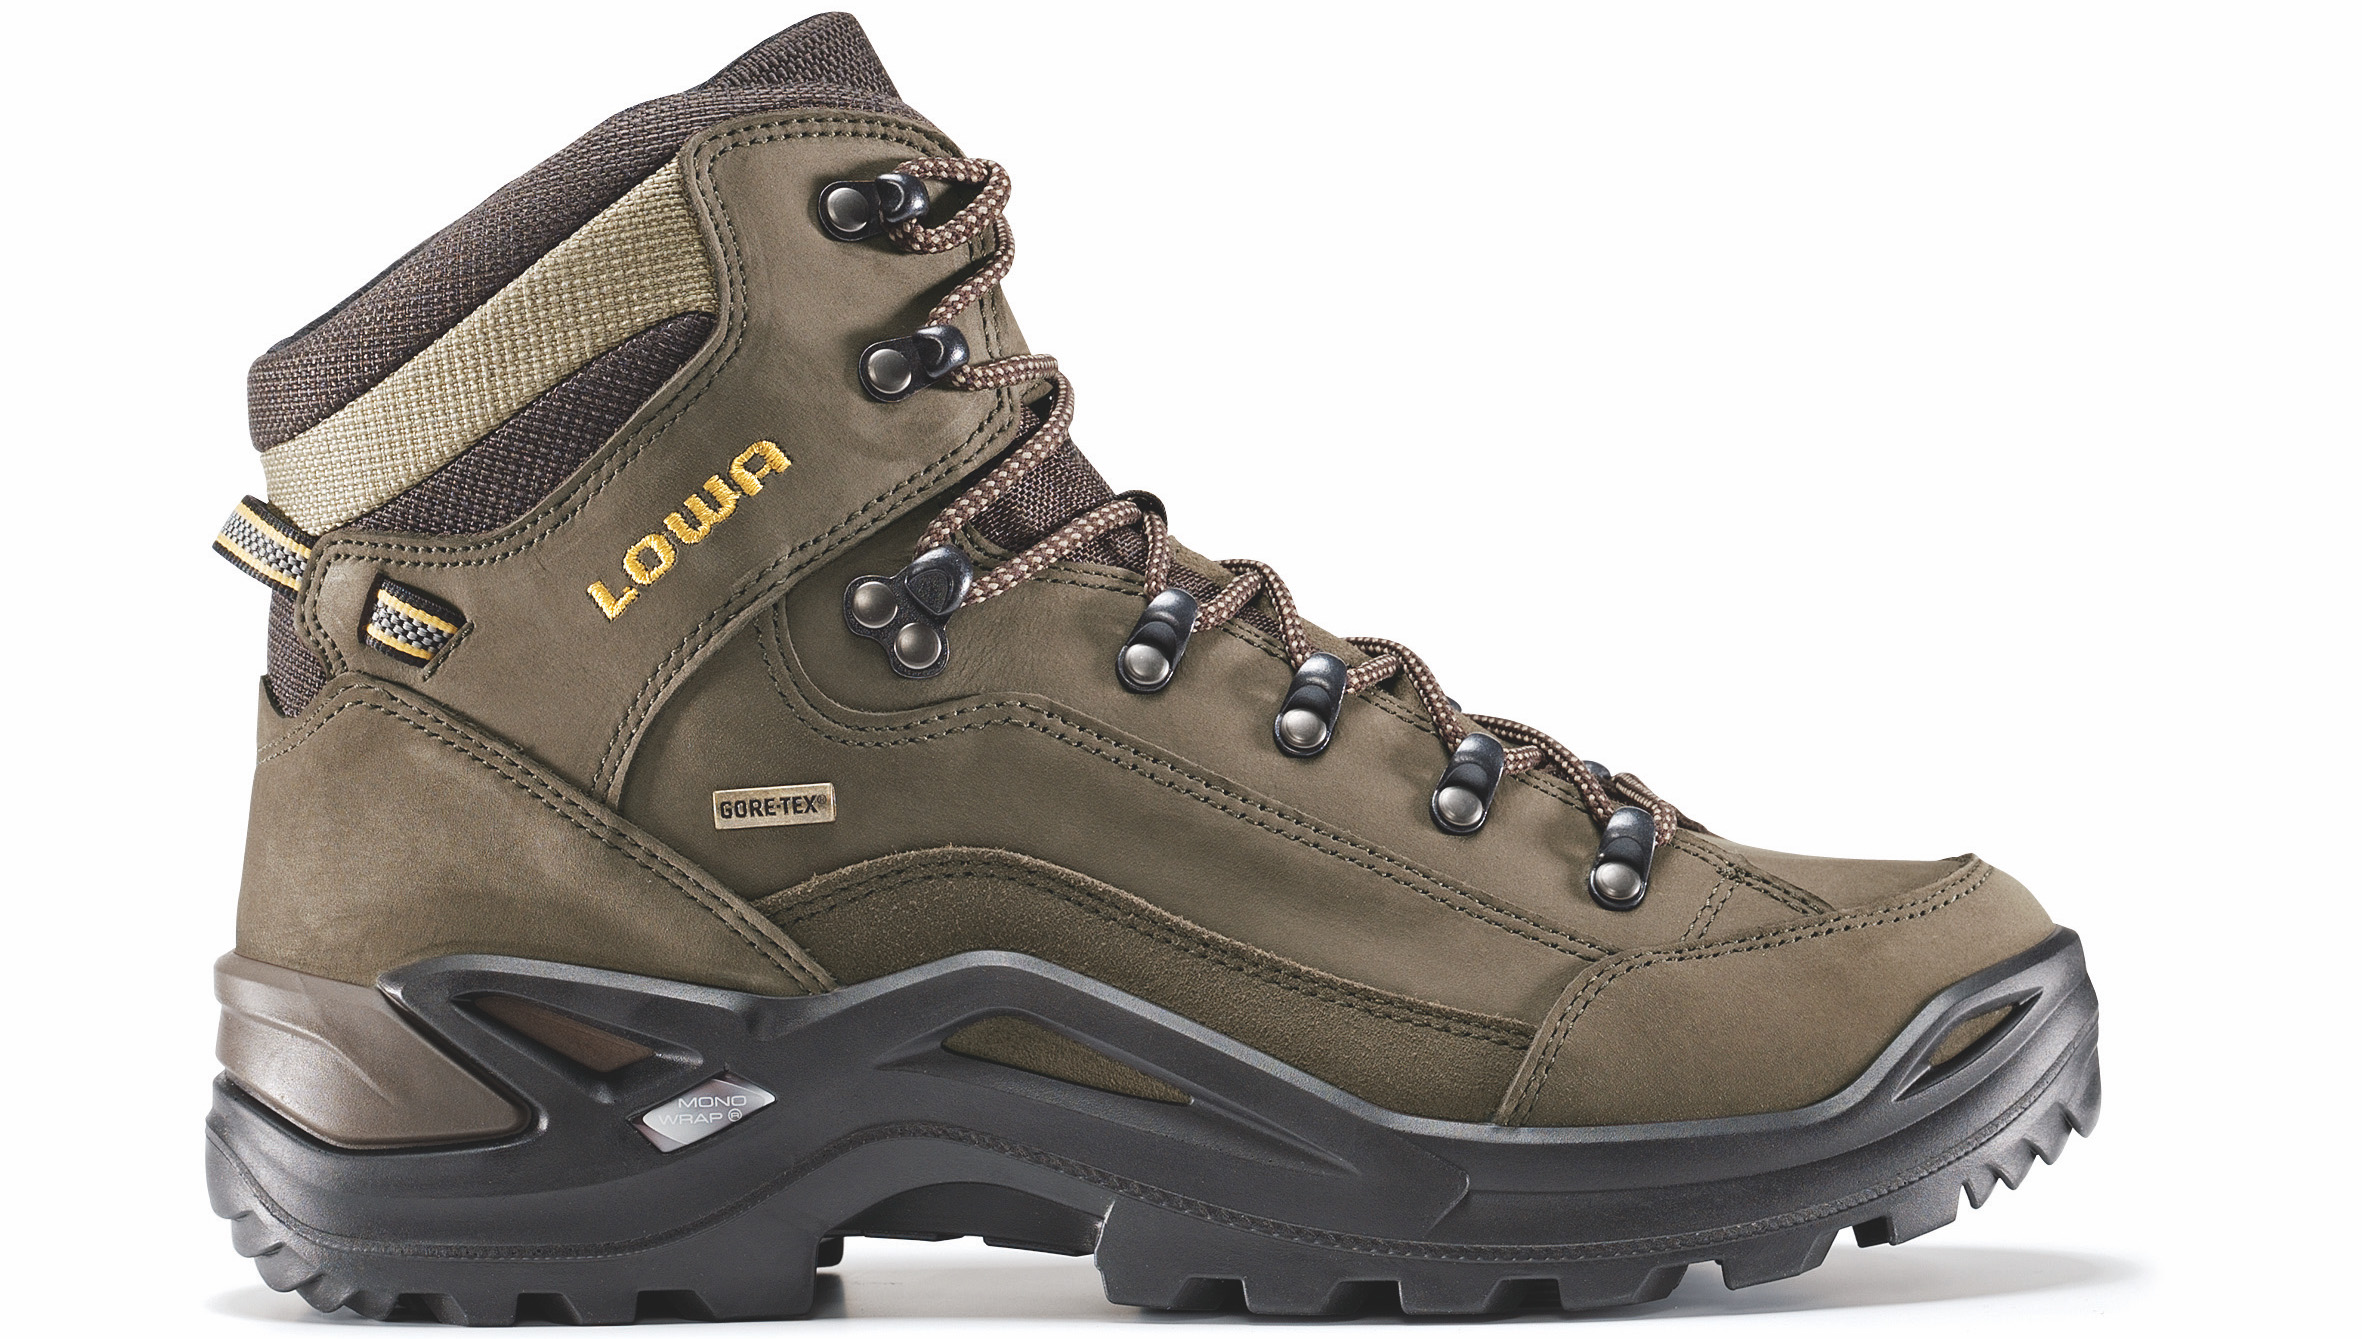 Boot Review: Lowa Ticams & Renegades